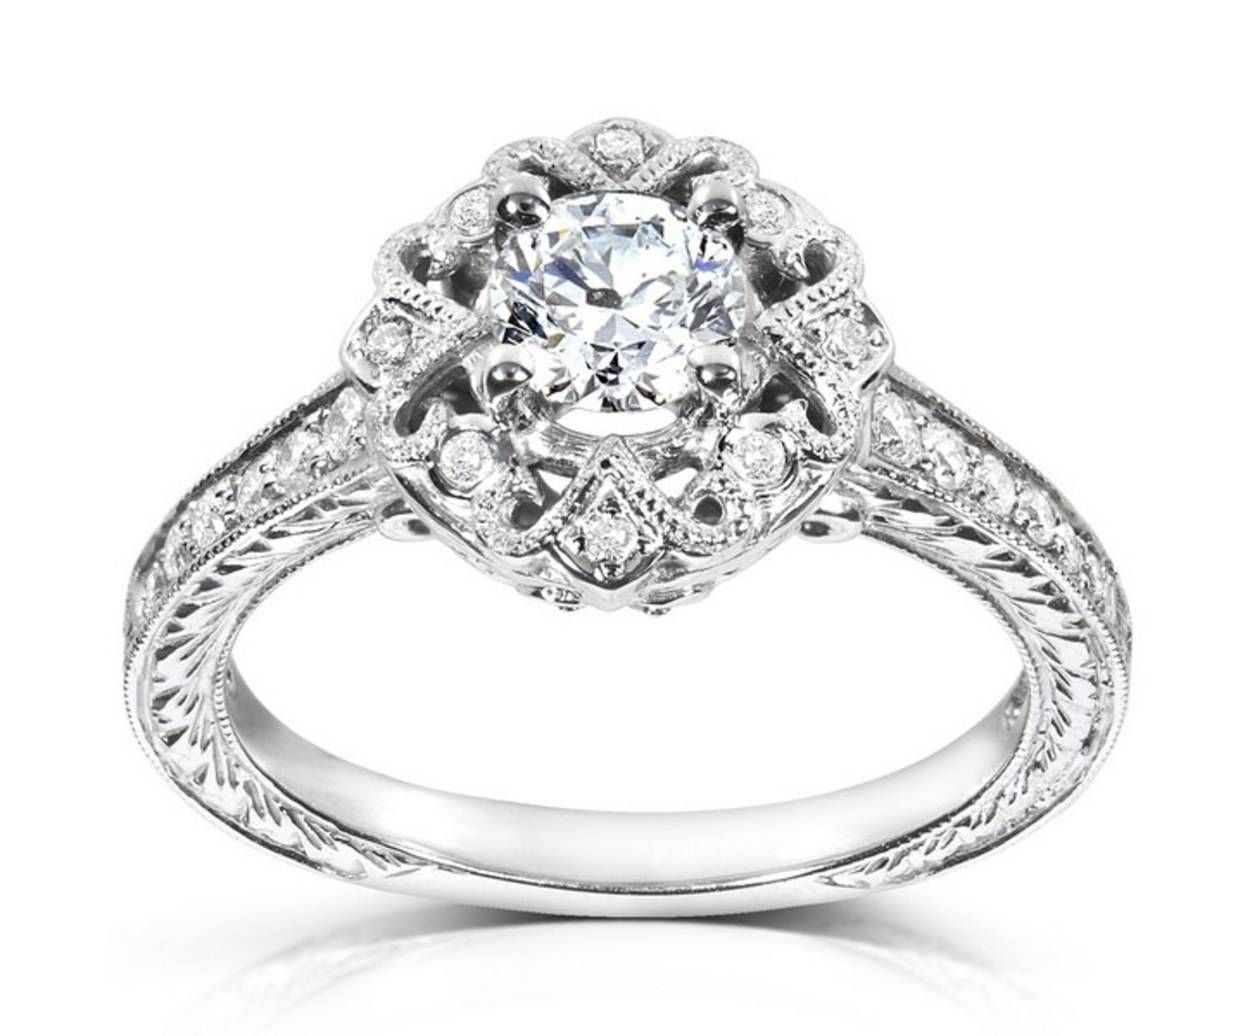 Affordable Engagement Rings Under $1,000 | Glamour Intended For Engagement Rings Under  (View 13 of 15)